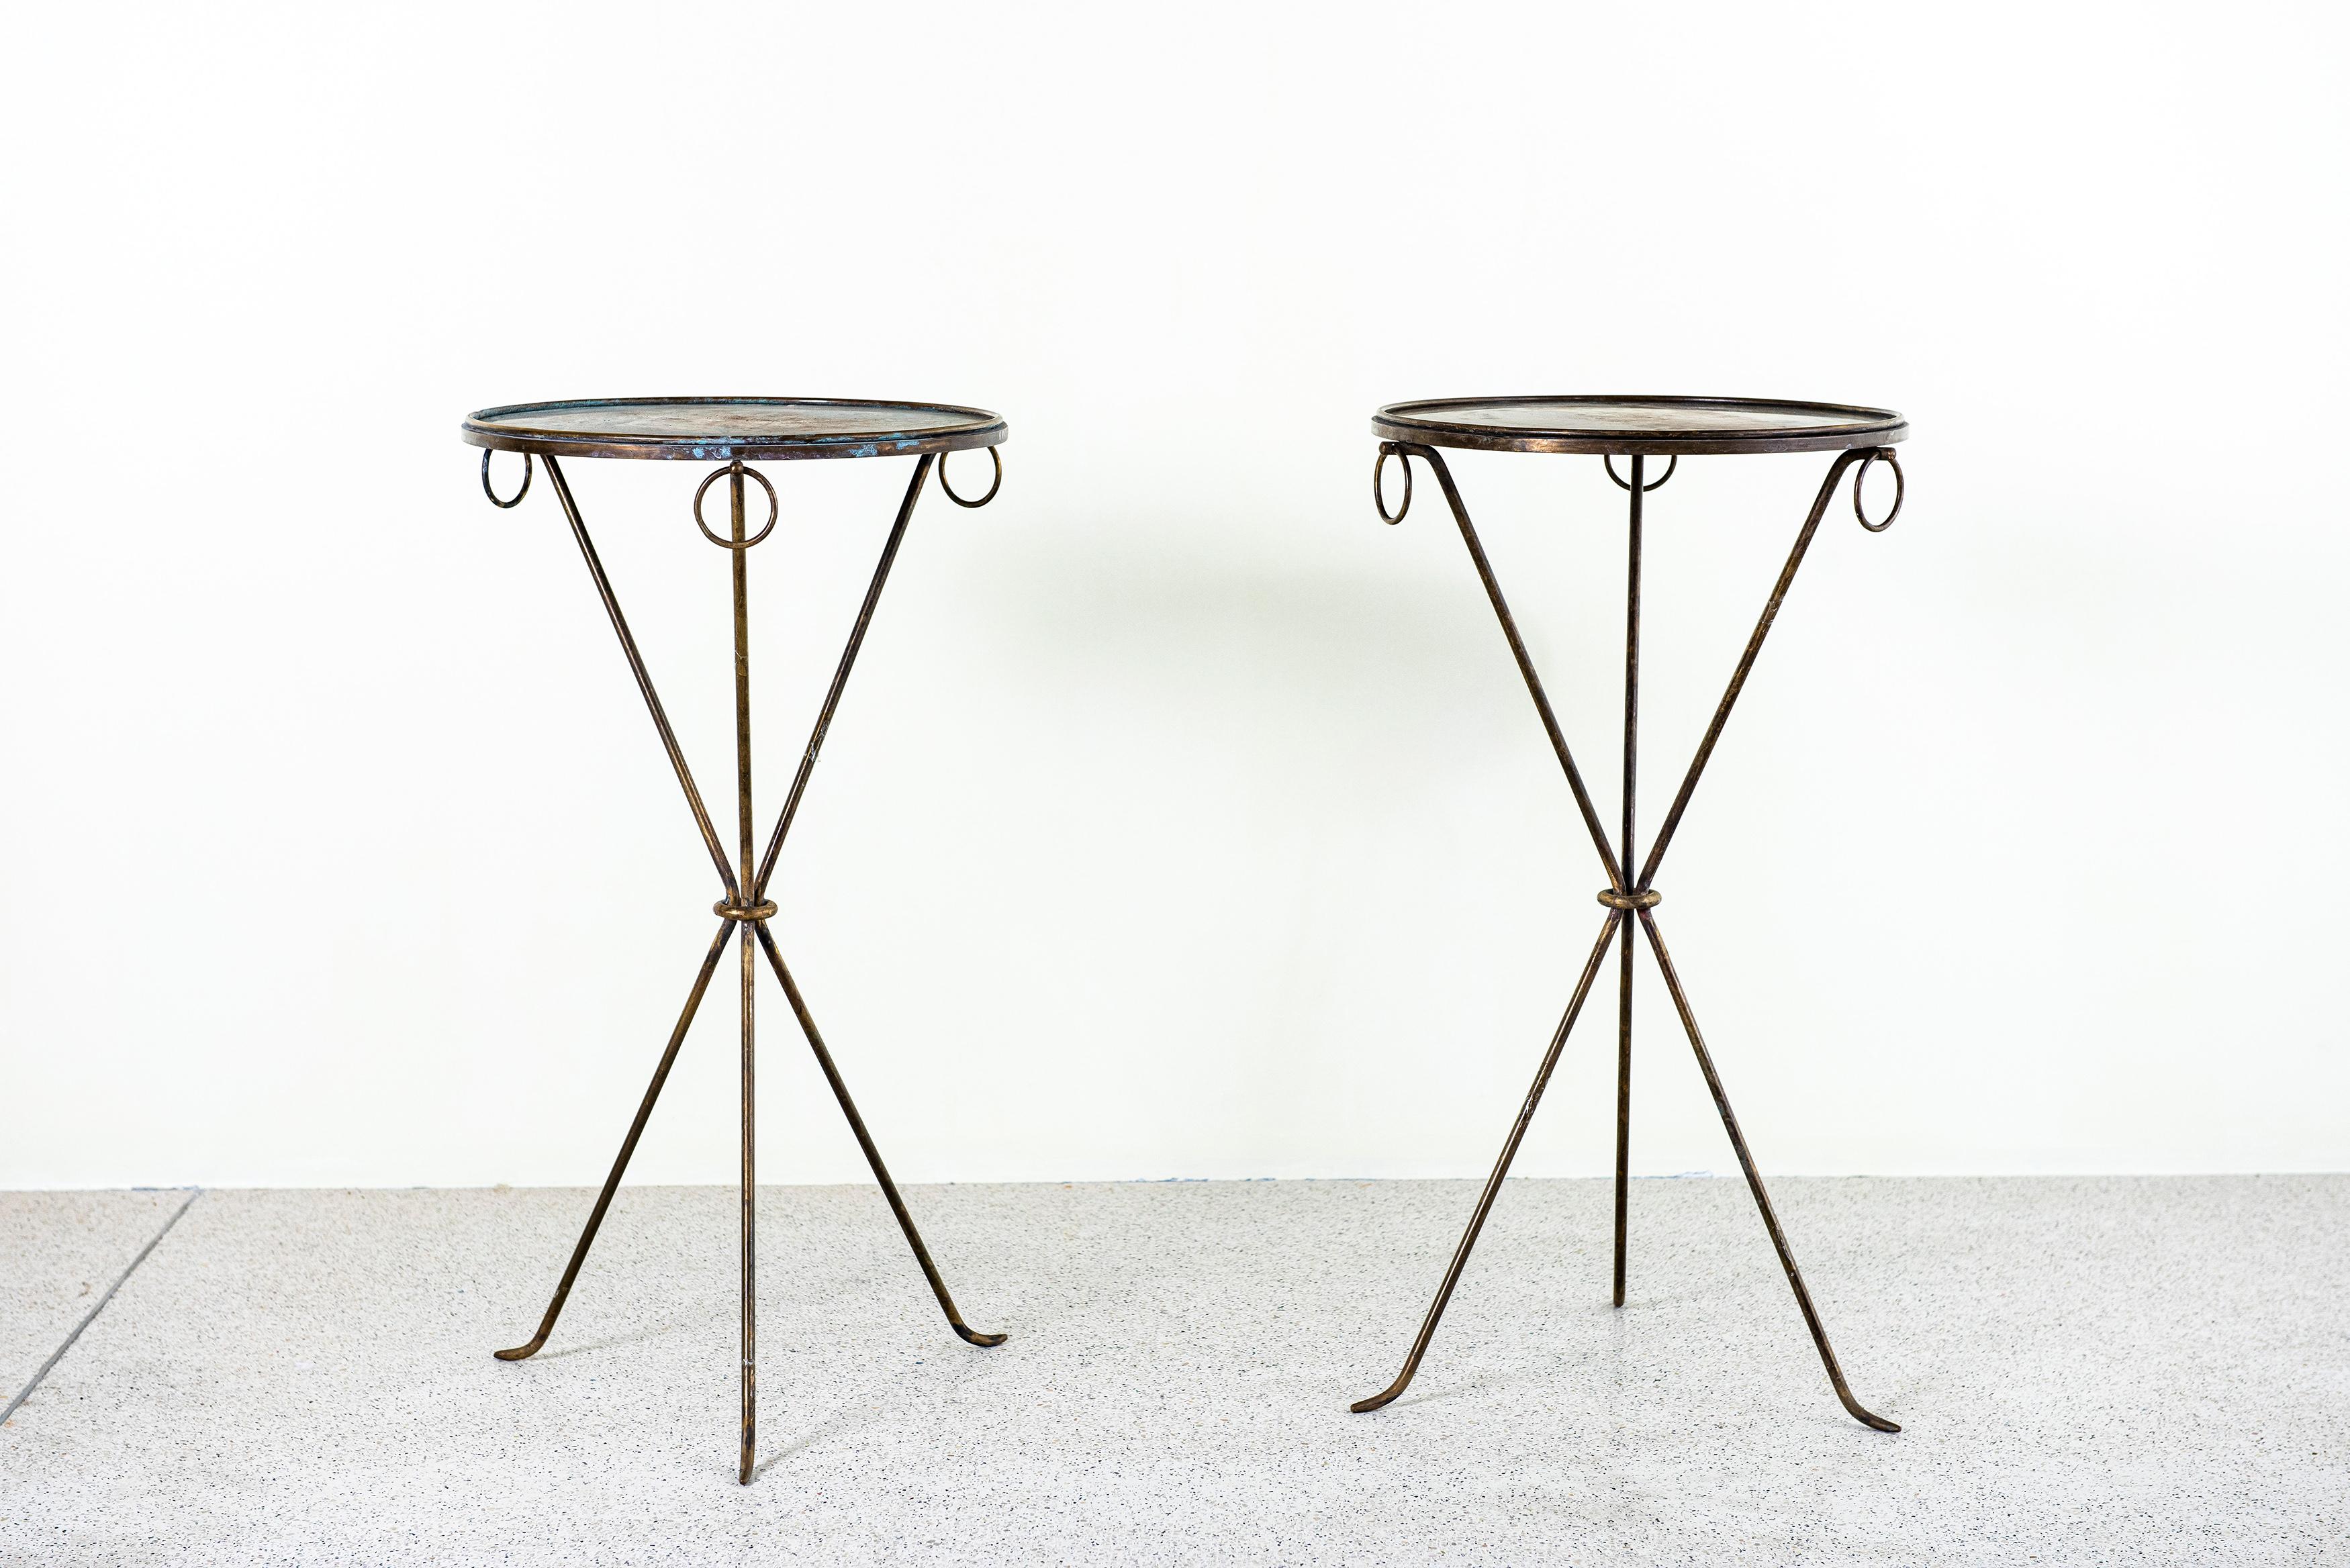 Pair of brass guéridons tables by Jean Michel Frank for Casa Comte, Argentina, 1939.
 